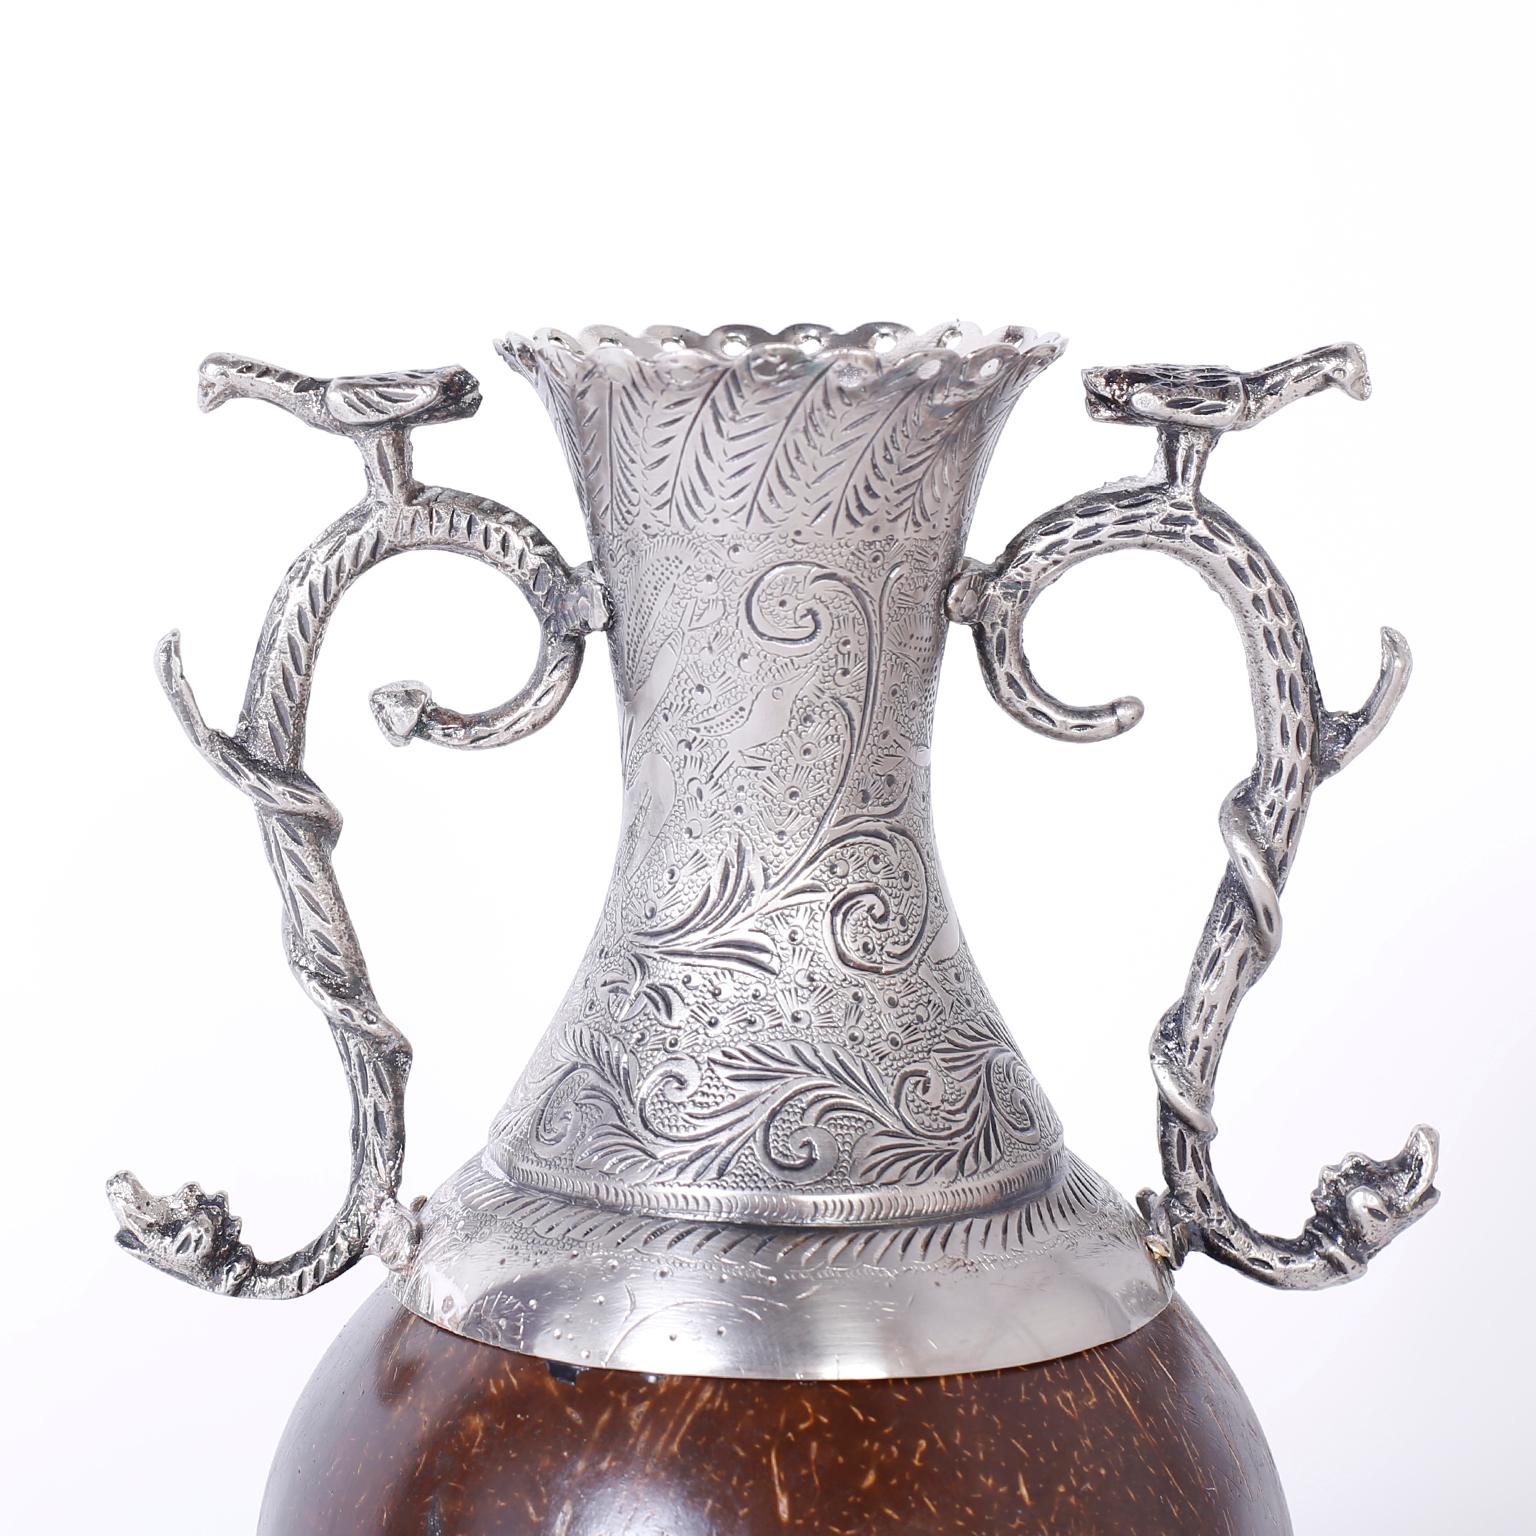 Antique Spanish Colonial vase with an unusual combination of materials. The vase is silvered metal with floral engravings and graceful handles depicting birds on snakes. The center in the Anglo-Indian manner is a polished coconut on a floral